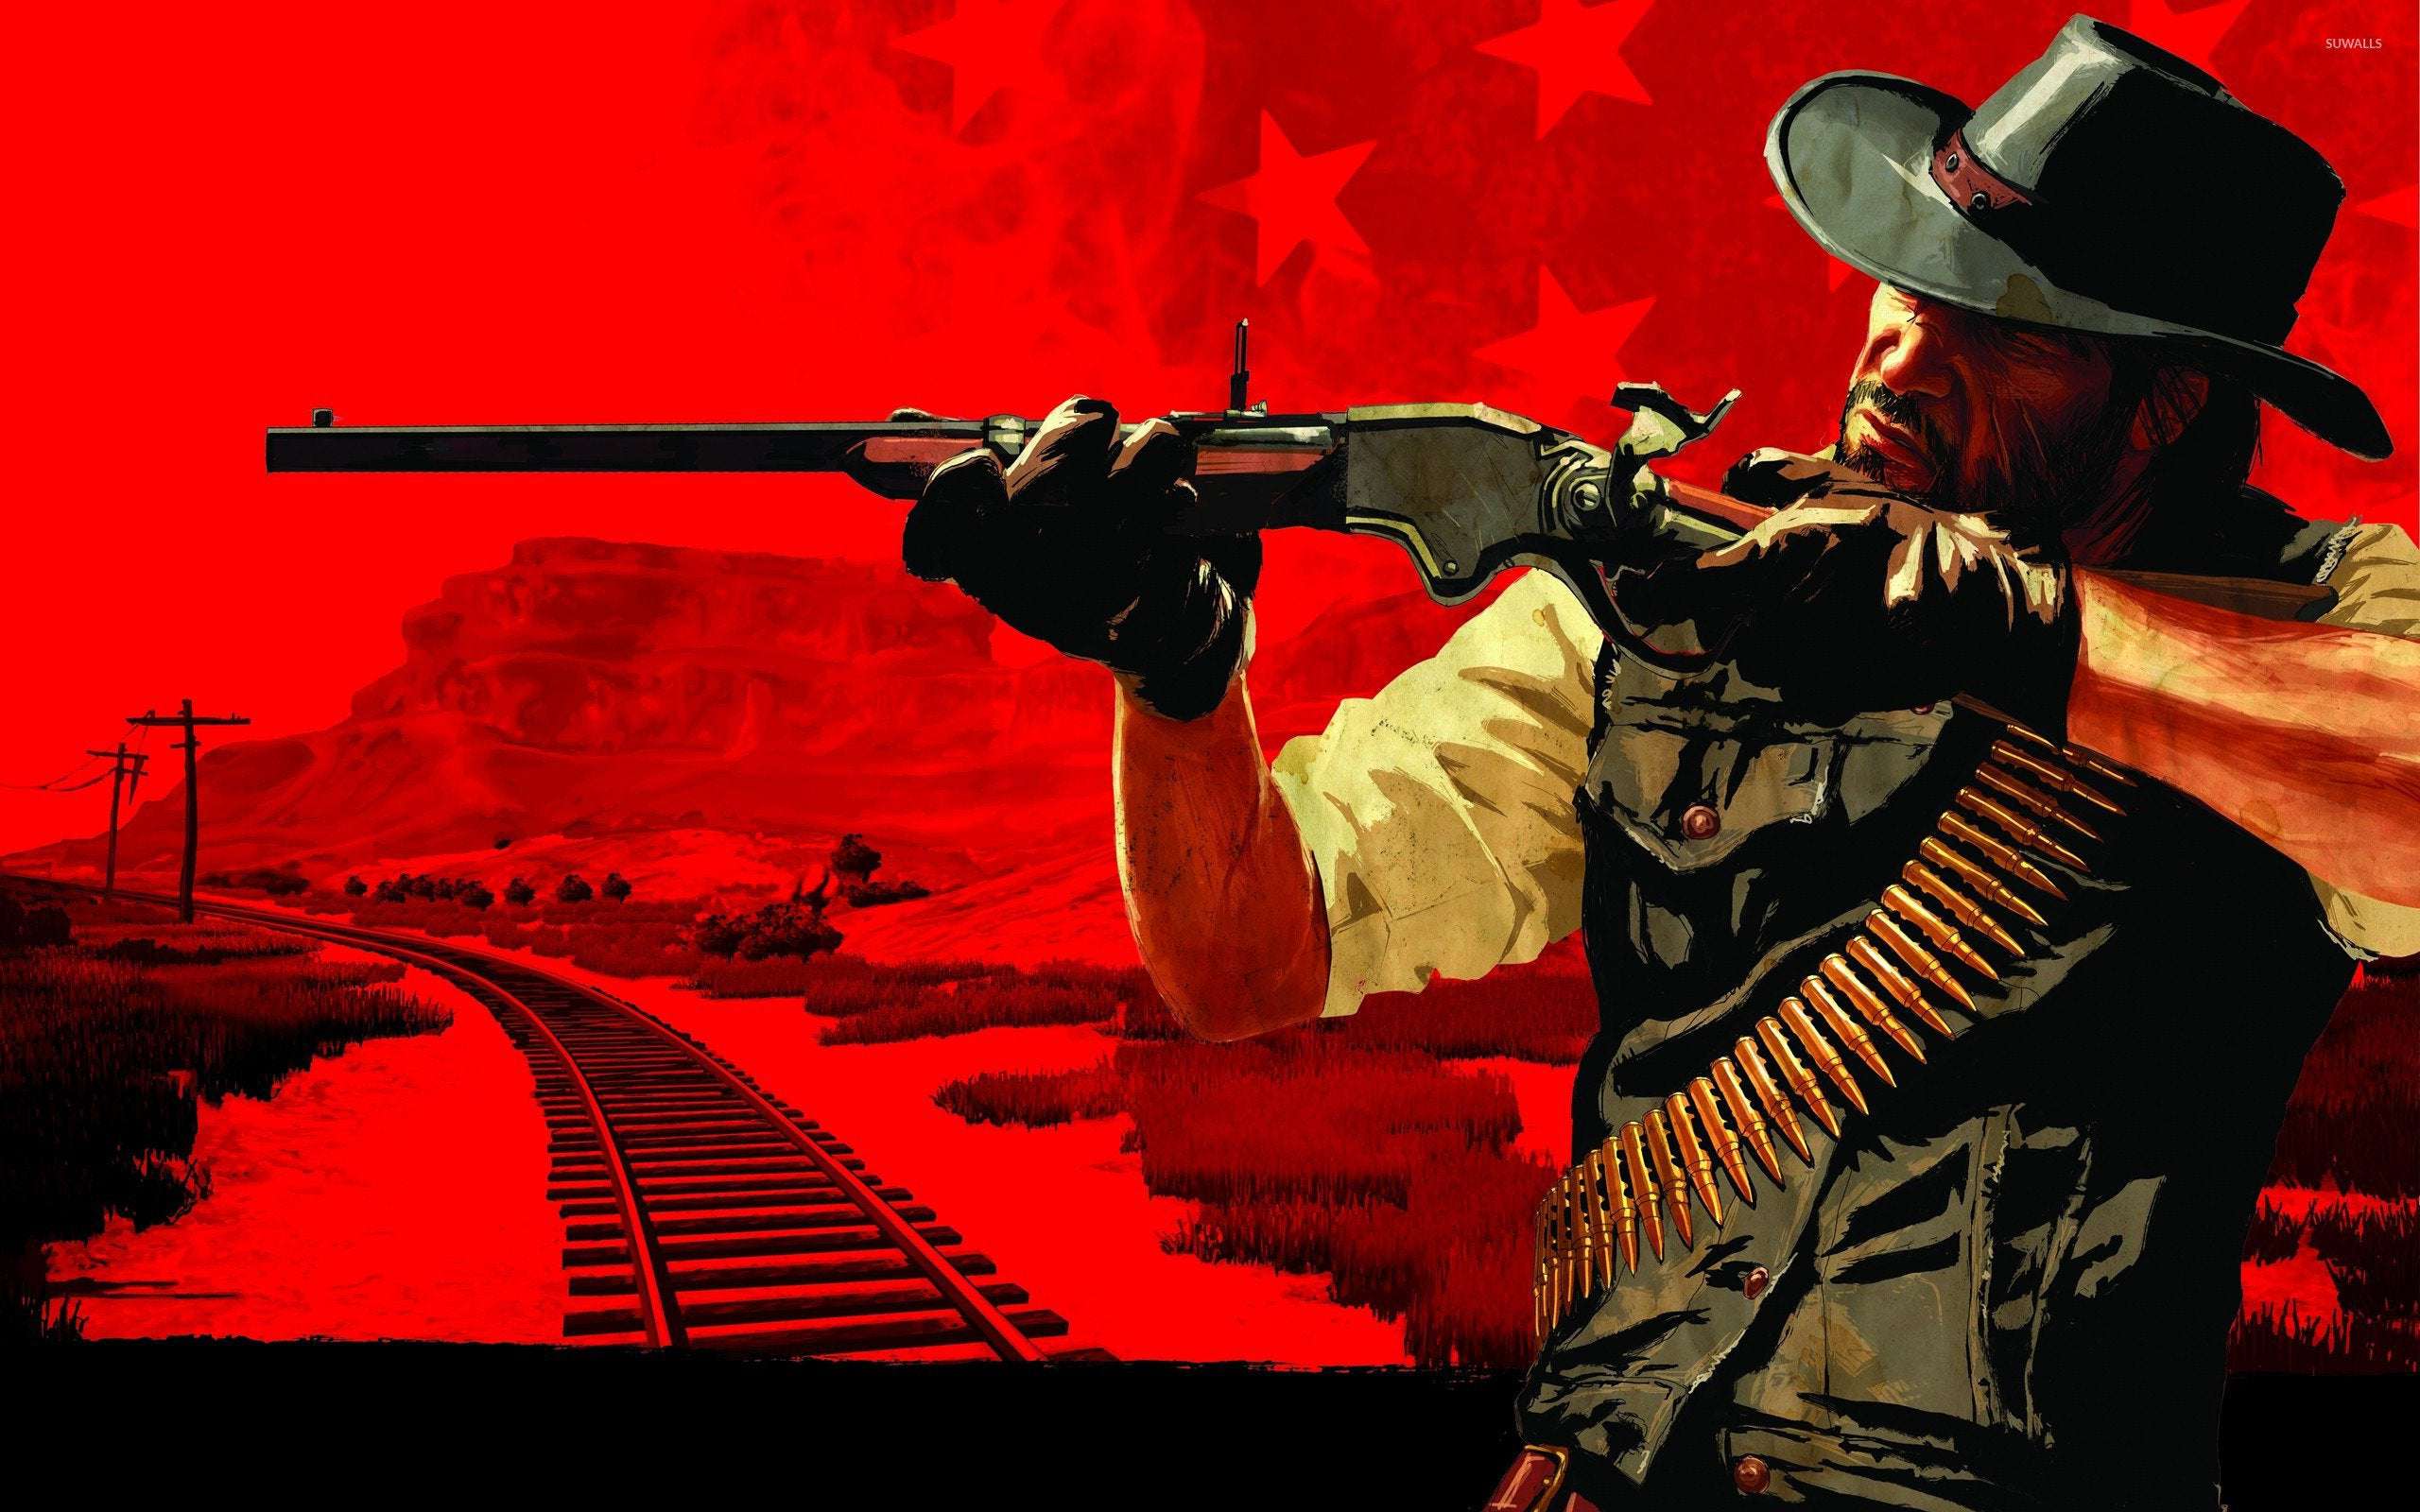 image for Rumor: Red Dead Redemption Remastered Is Being Worked On, While GTA 6 Is Having Development Issues